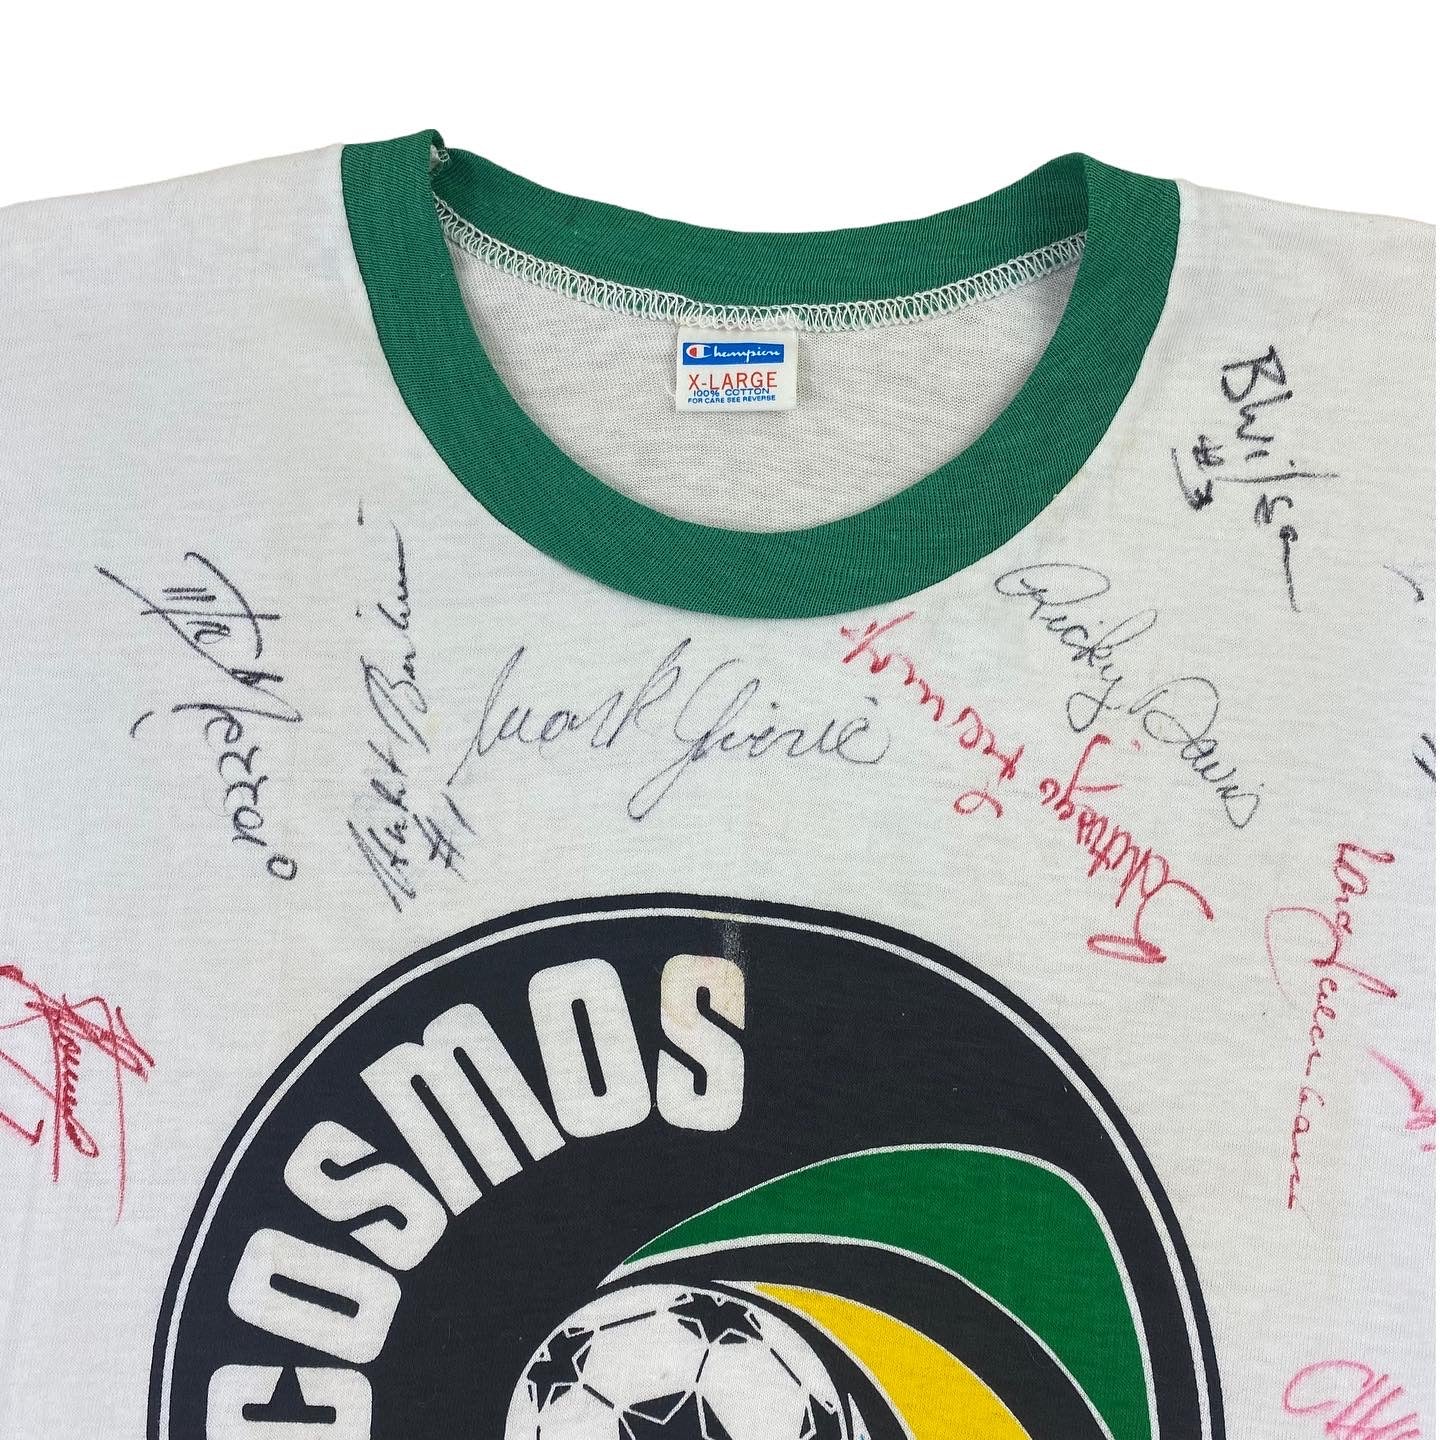 70s Blue bar cosmos tee. Signed